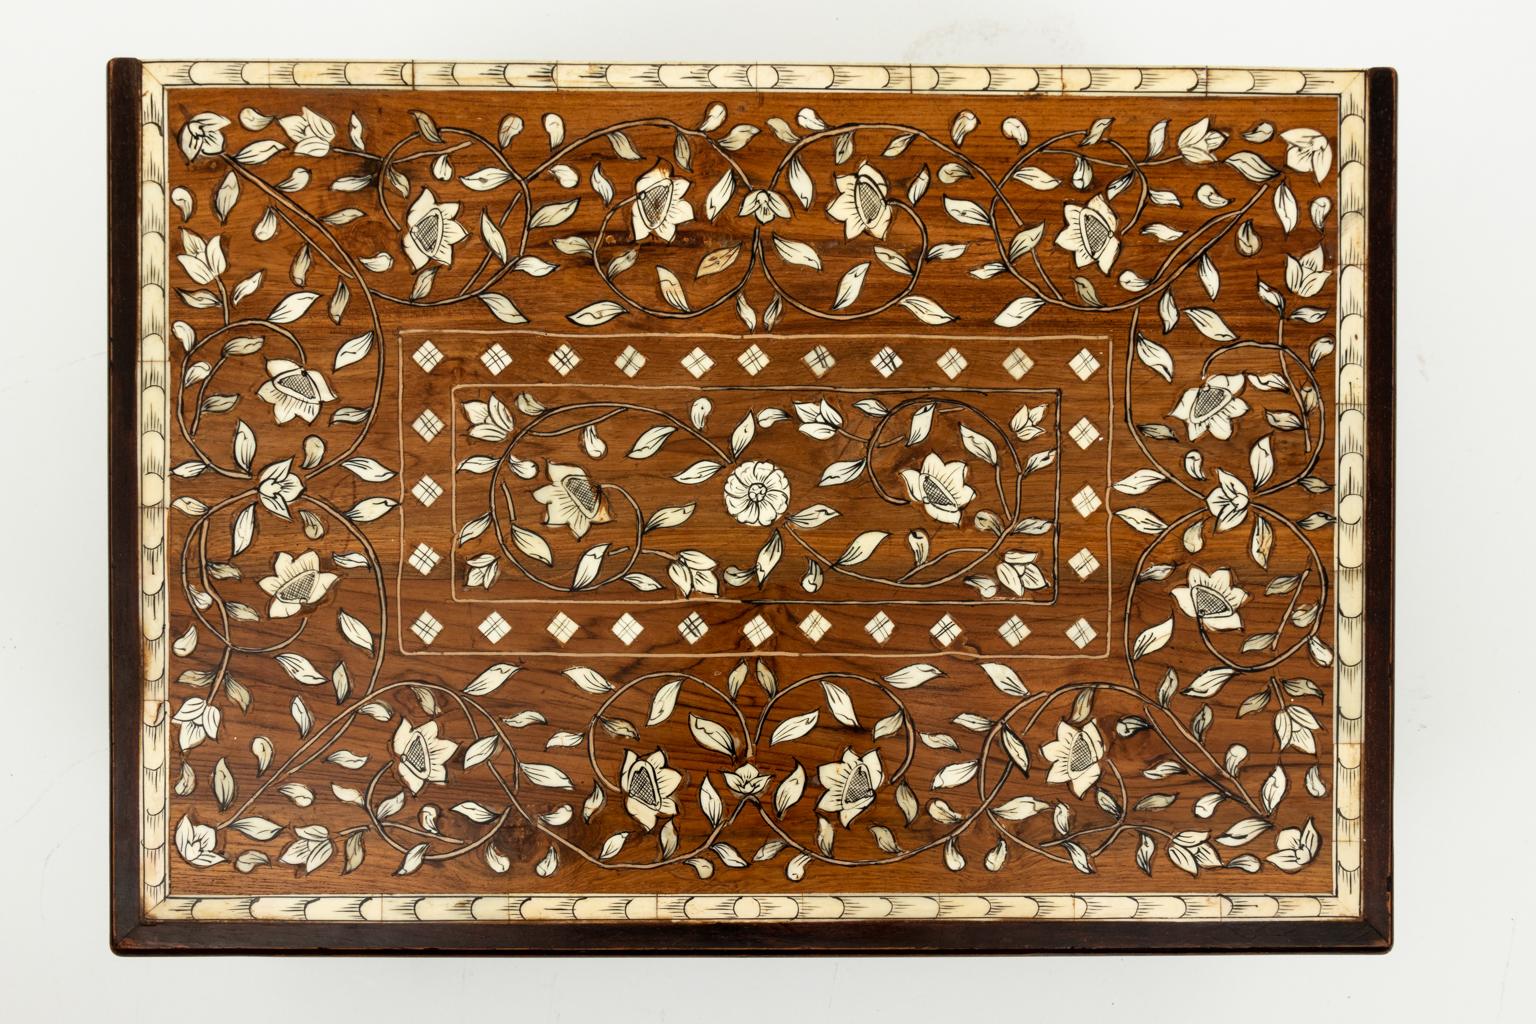 Bone and teakwood inlaid box decorated with flower pattern throughout. Please note of wear consistent with age including minor finish loss.